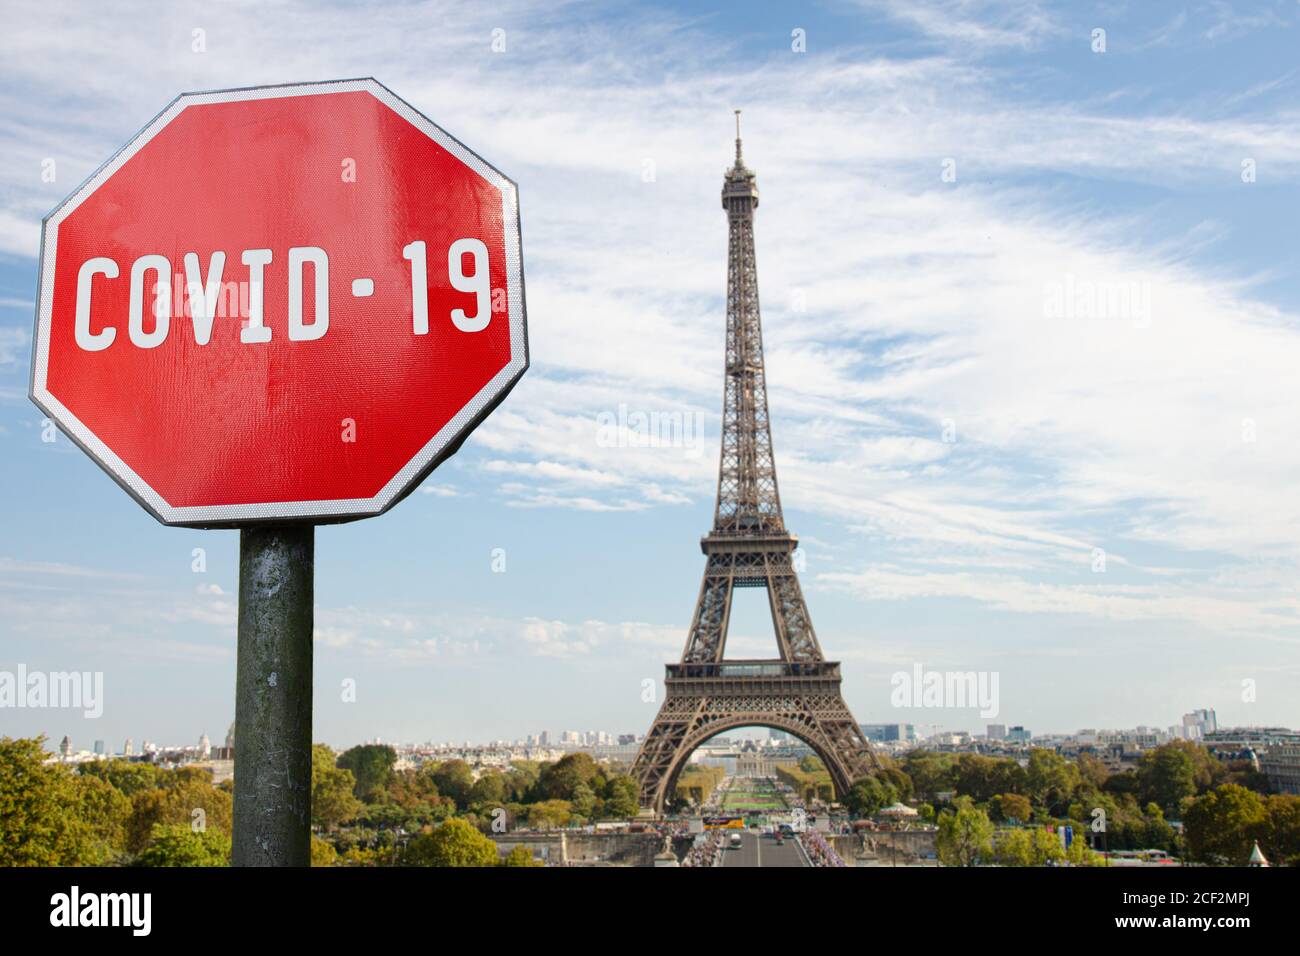 COVID-19 sign with Eiffel tower in Paris, France. Warning about pandemic in France. Coronavirus disease. COVID-2019 alert sign Stock Photo